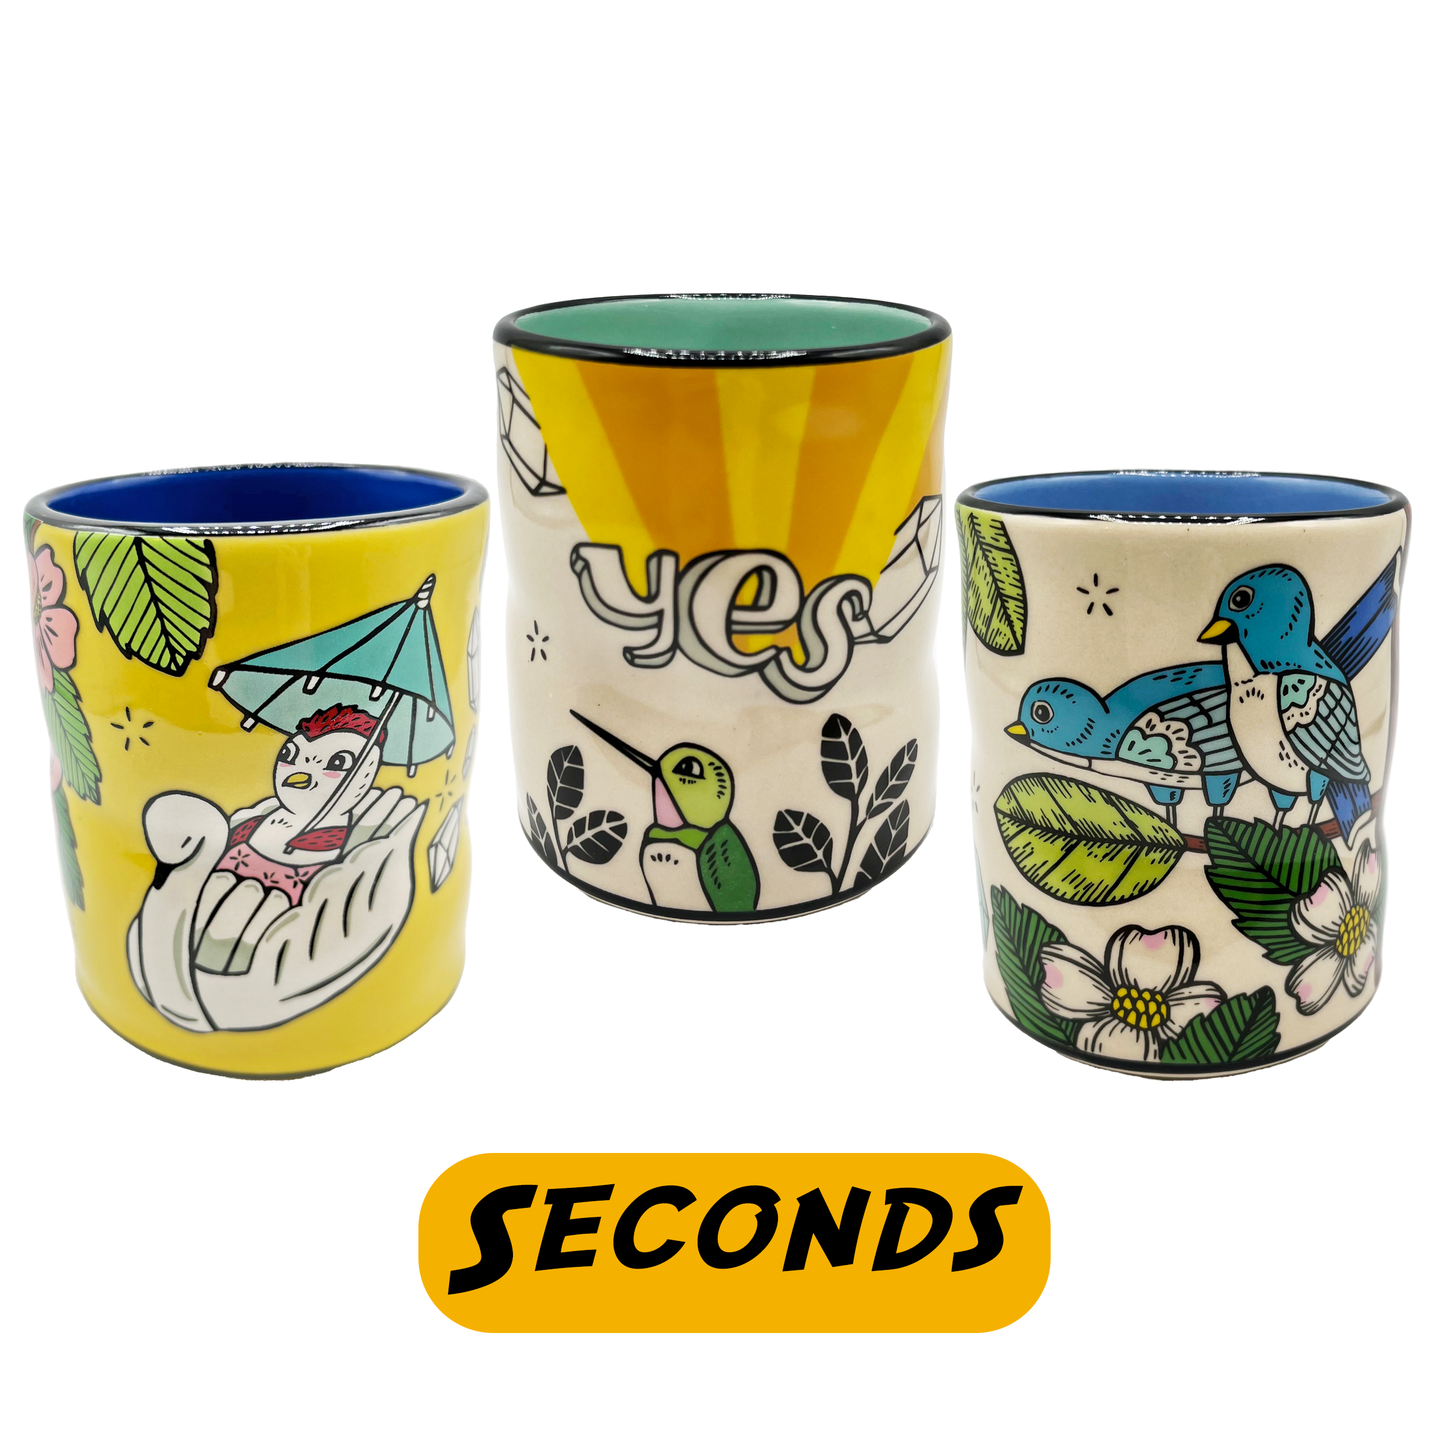 Seconds - Large Spark Cup